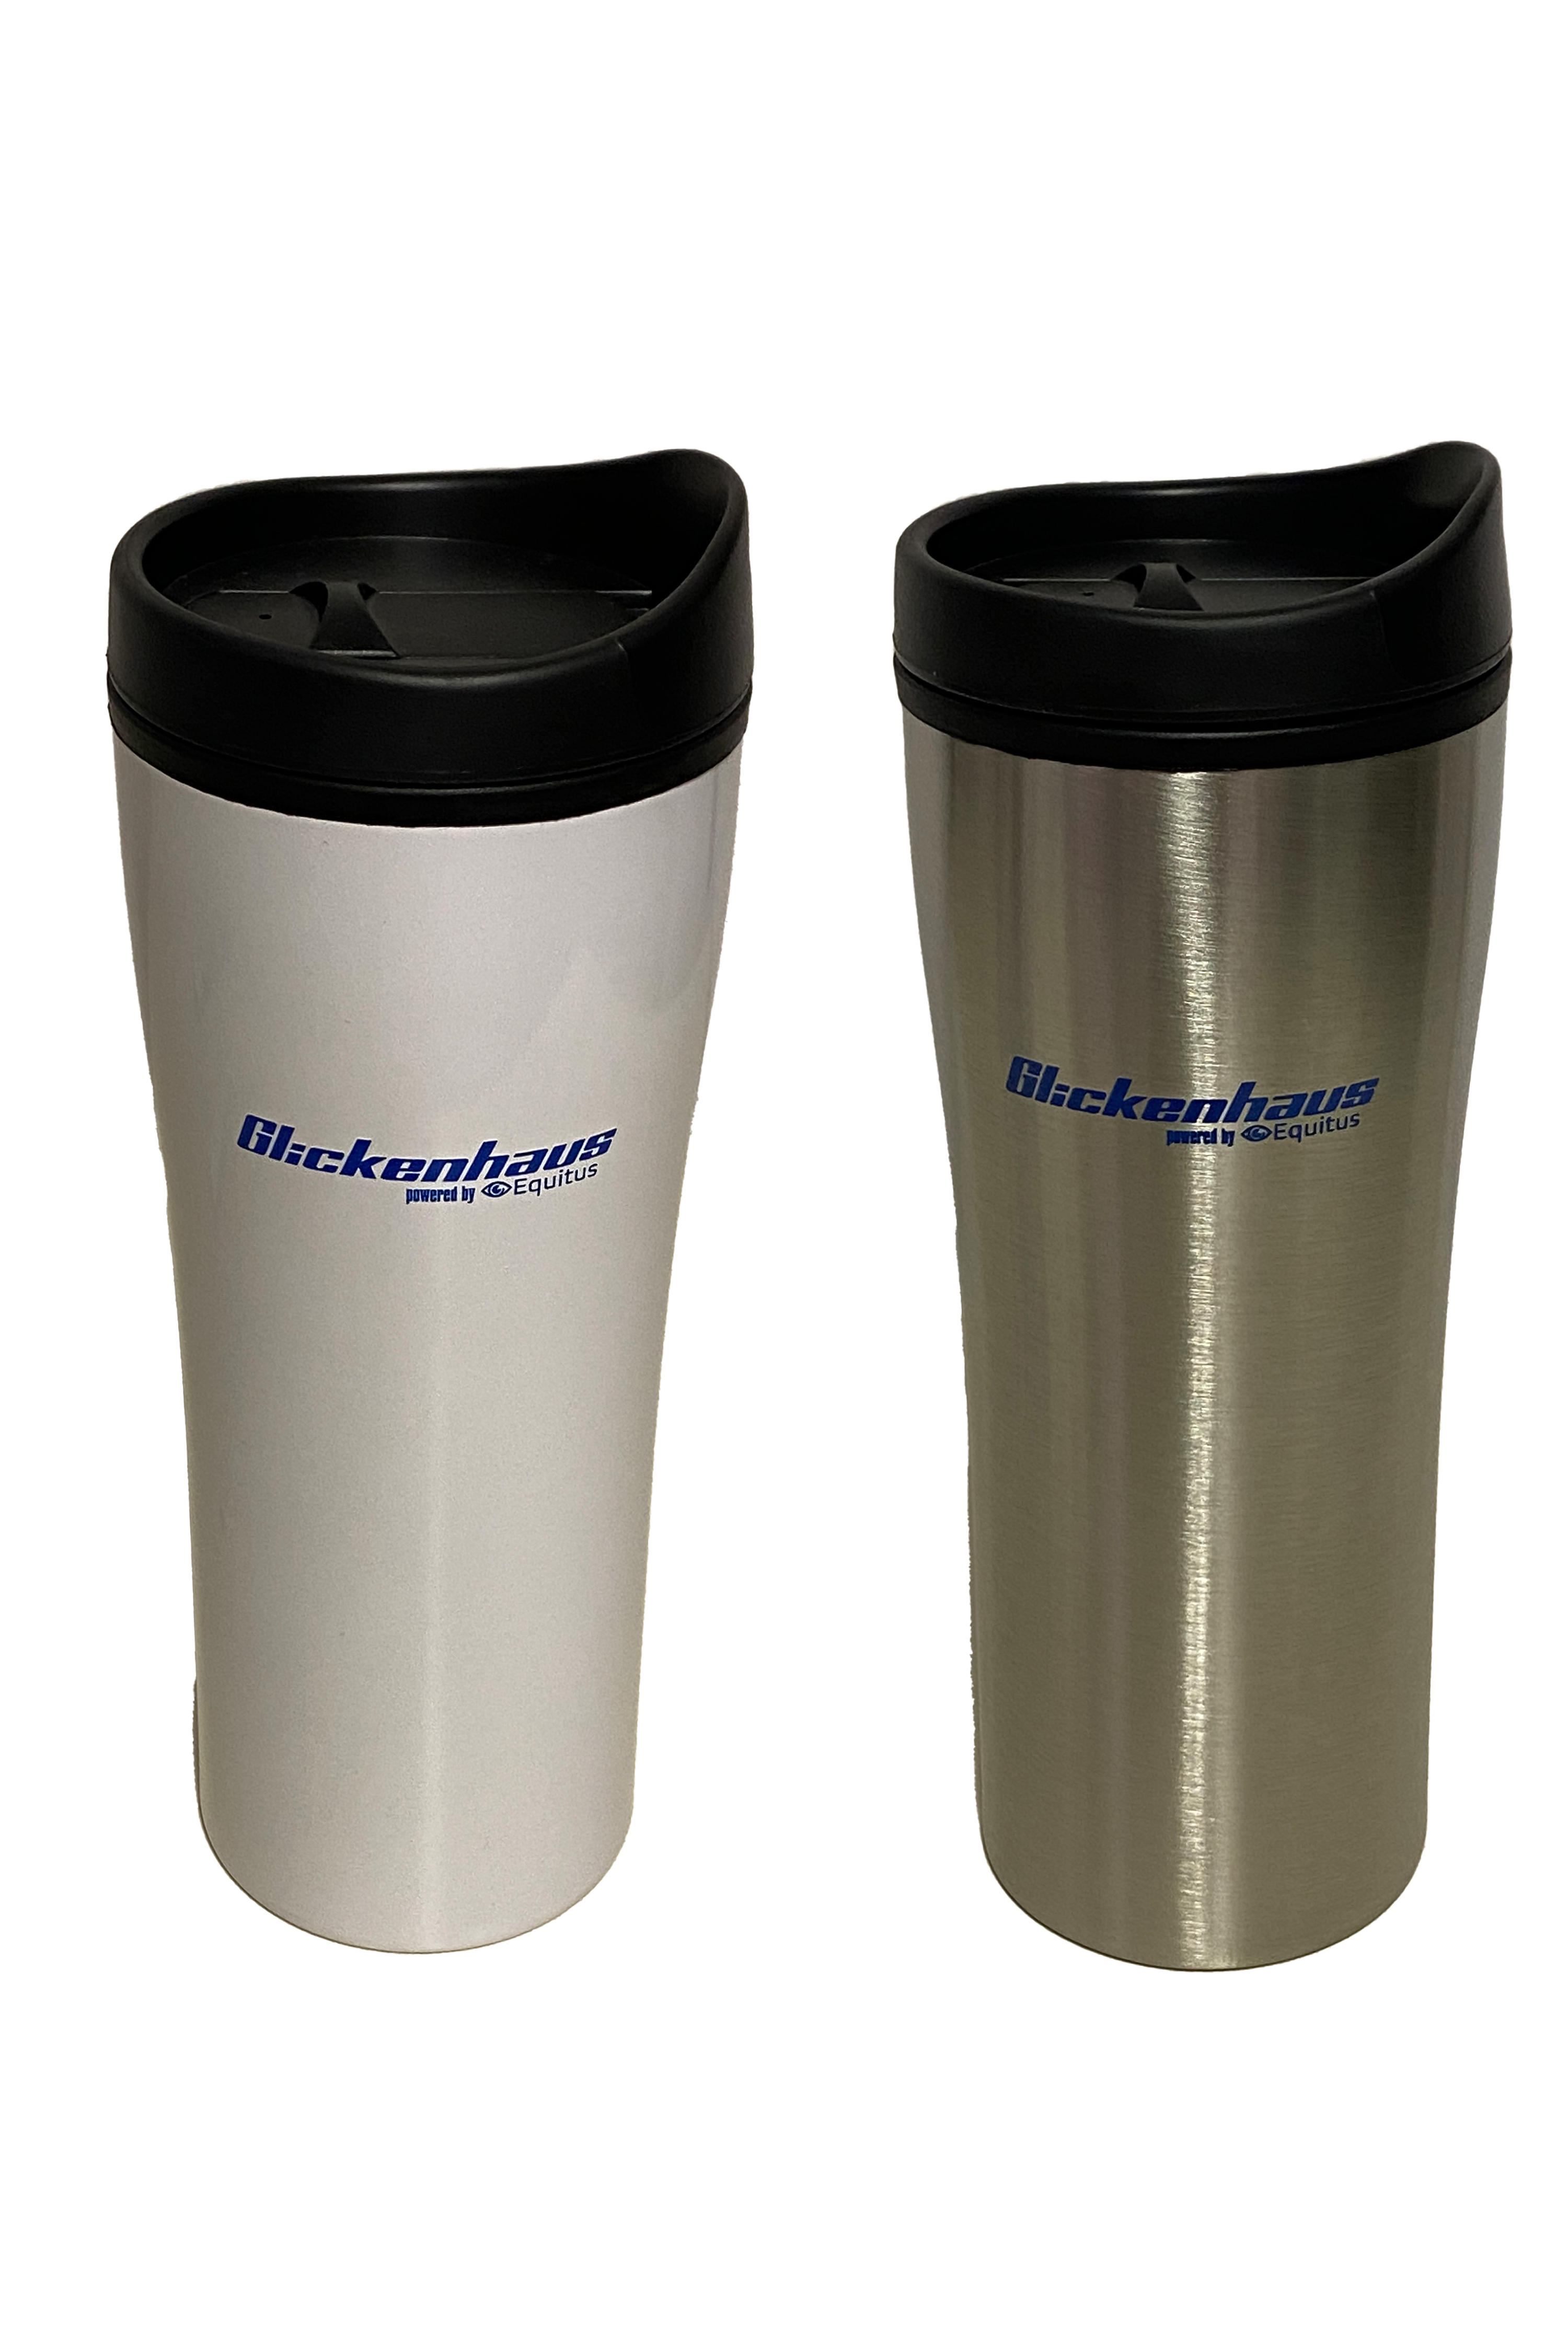 One white tumbler and one stainless steel tumbler with the "Glickenhaus Powered By Equitus" logo